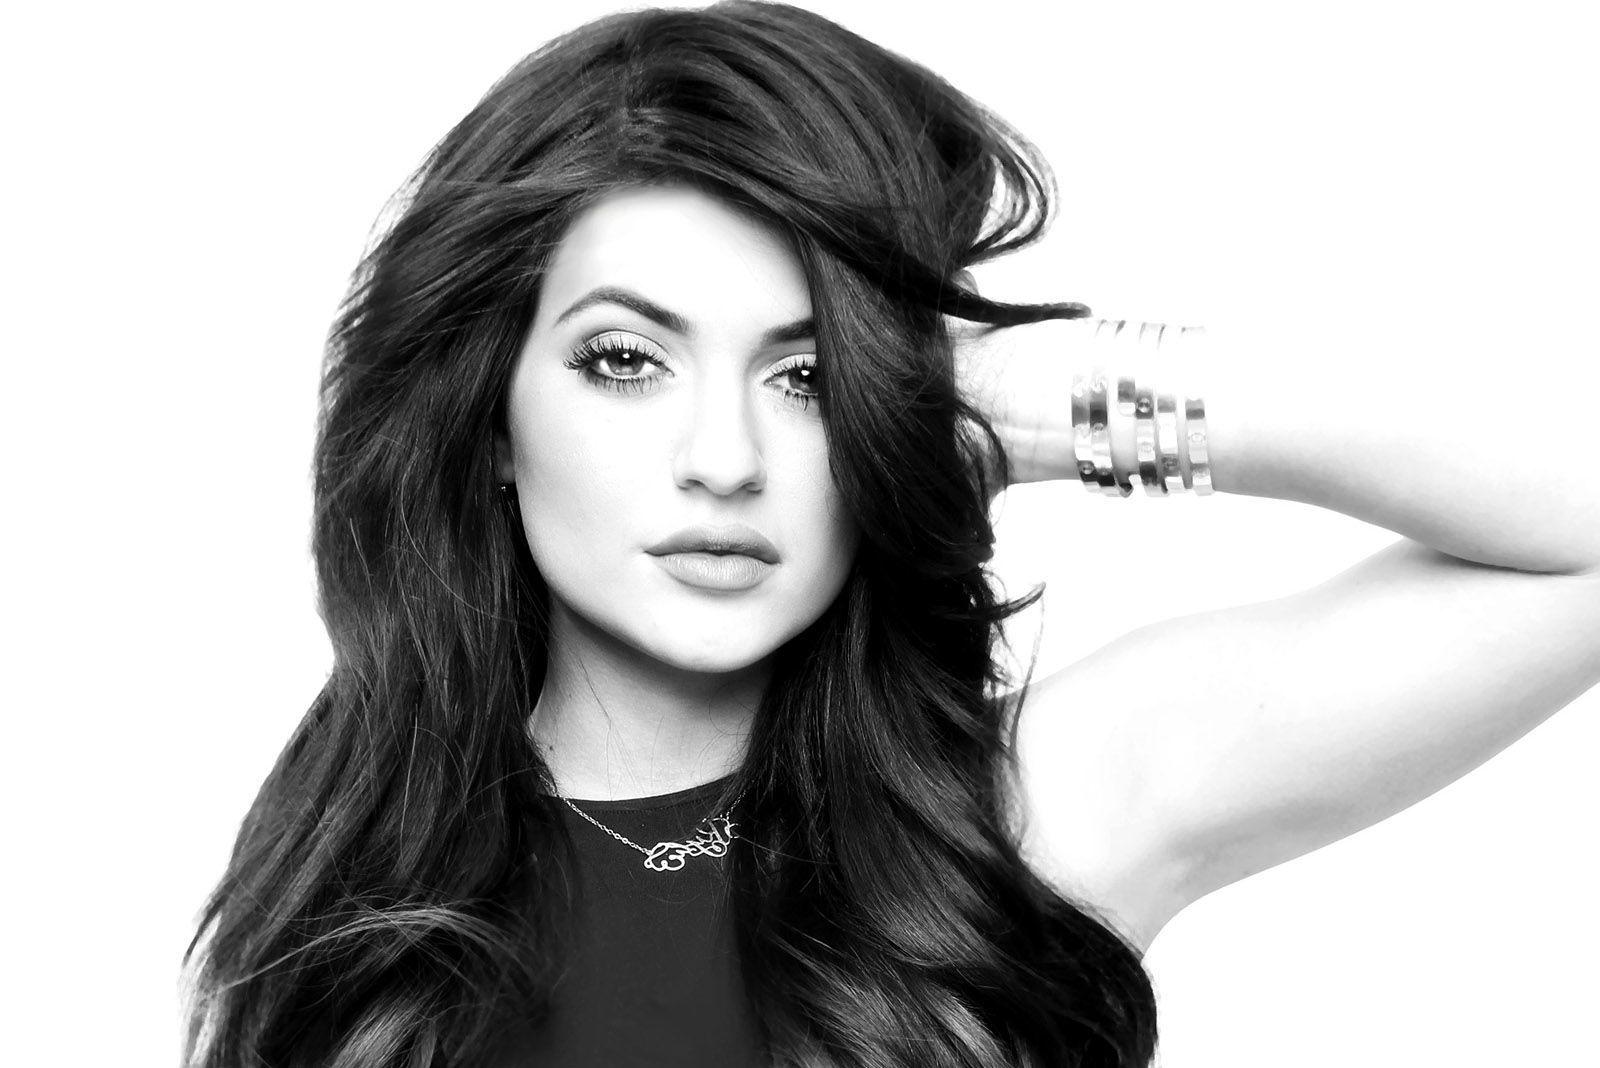 Kylie Jenner Wallpapers Wallpaper Cave Images, Photos, Reviews